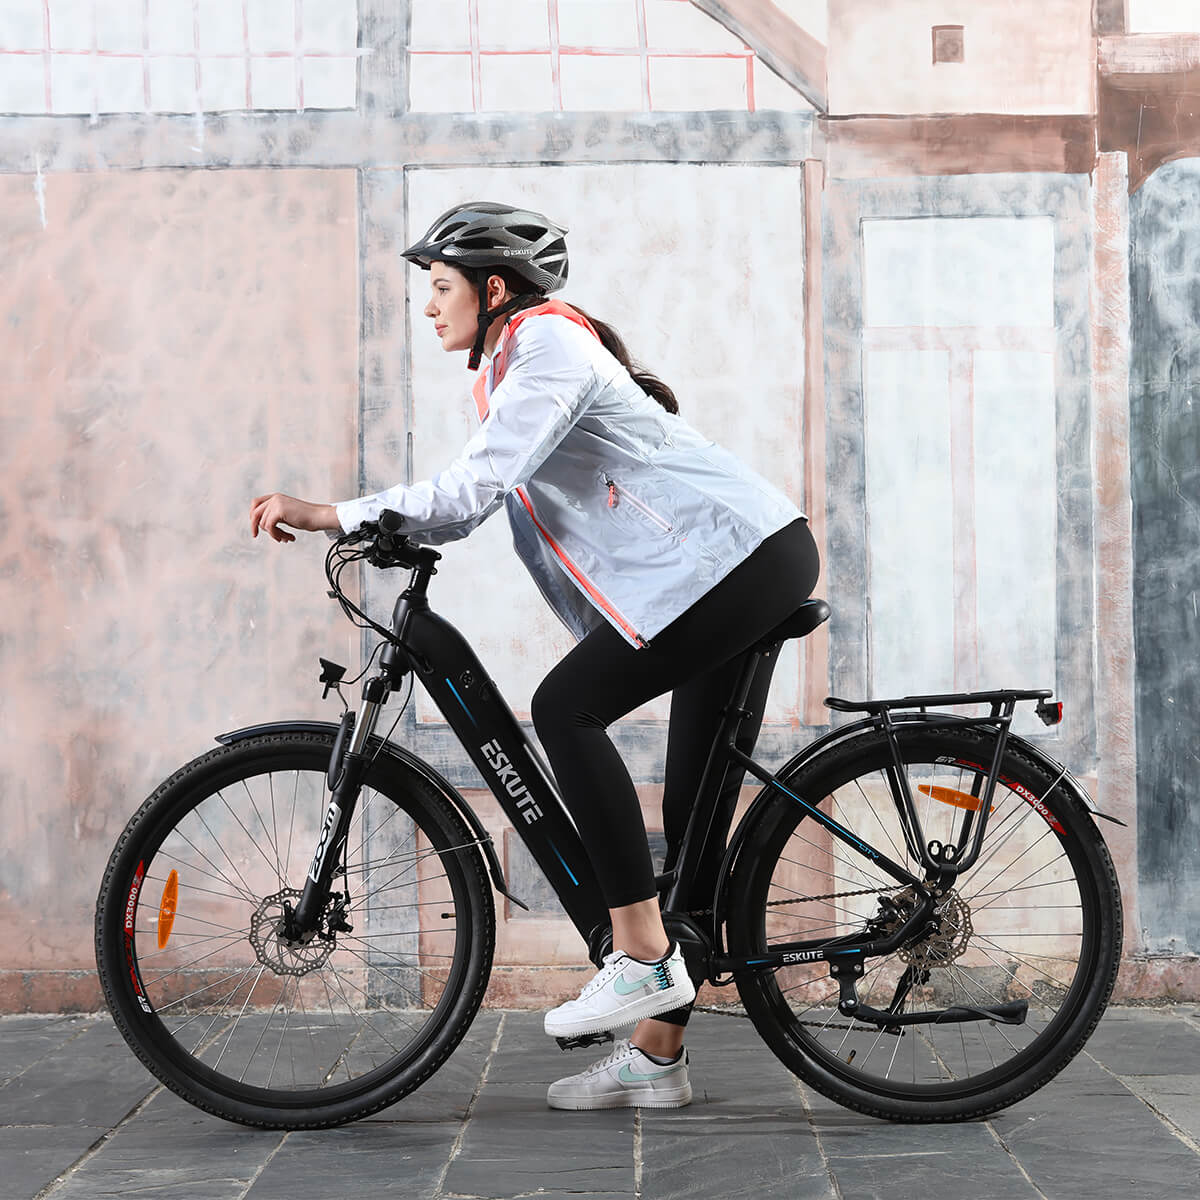 How to Prevent Injuries While Riding Electric Bikes